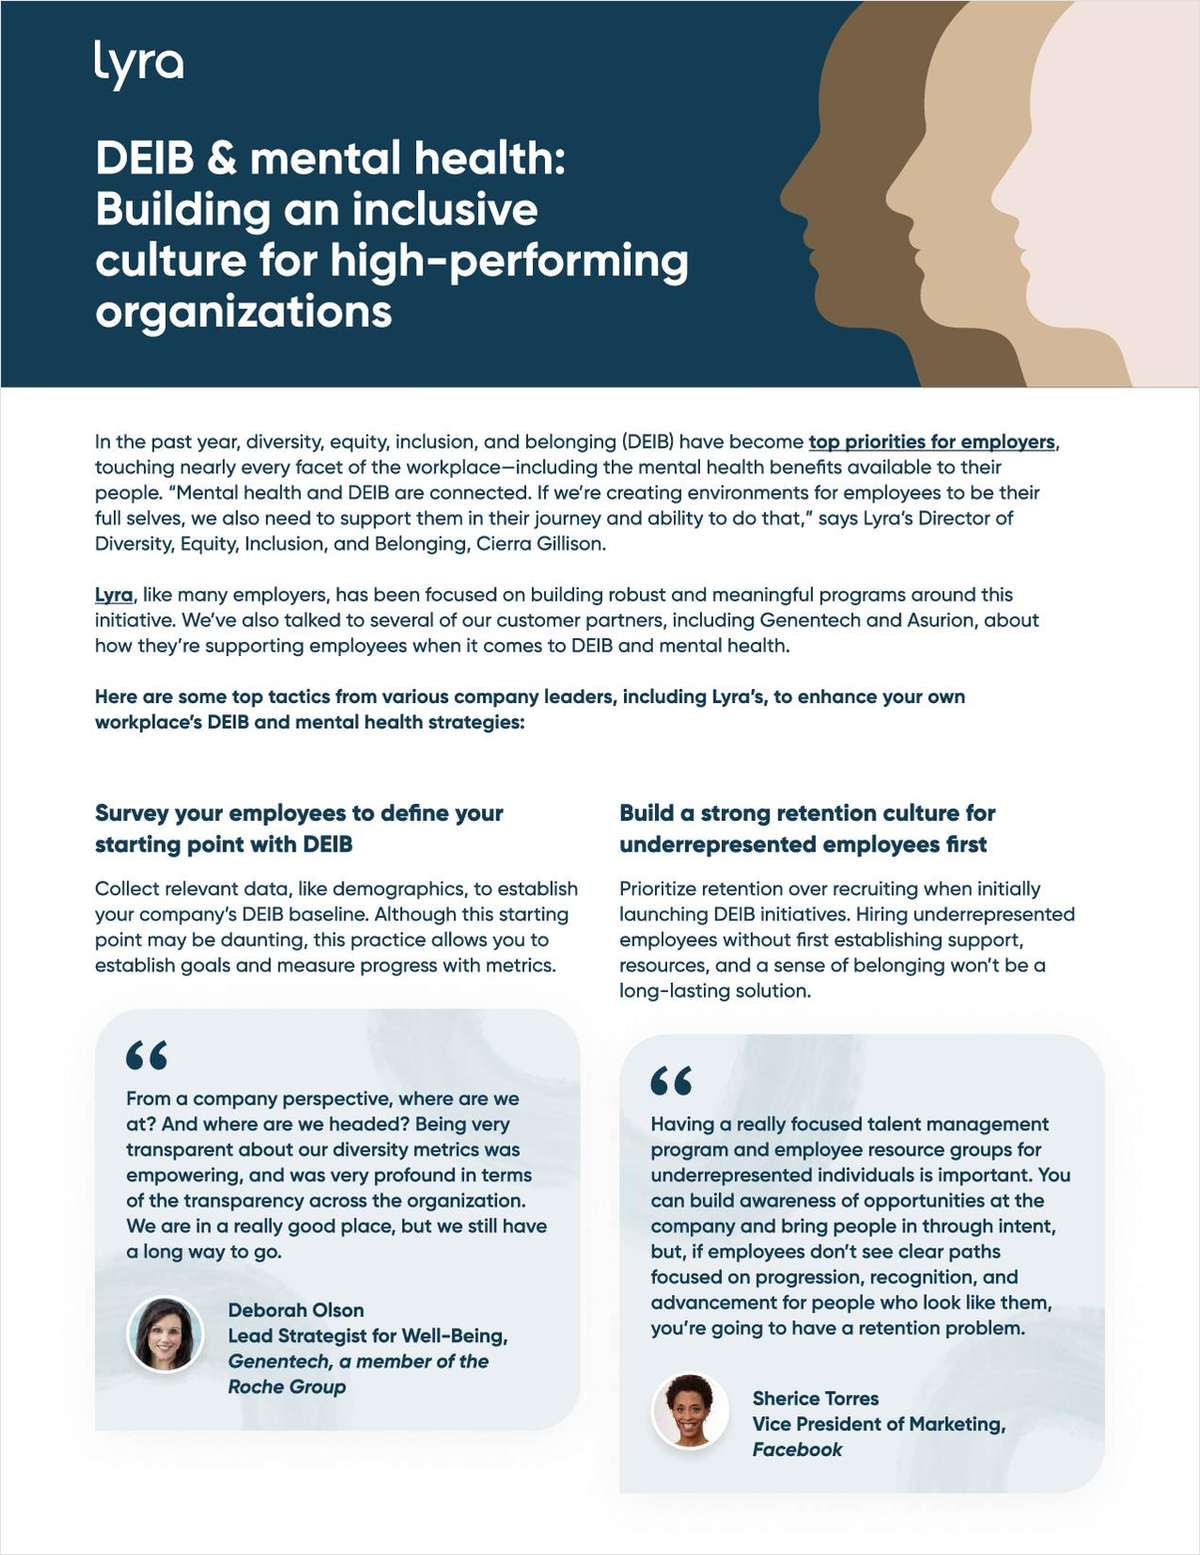 DEIB & Mental Health: Building an Inclusive Culture for High-Performing Organizations